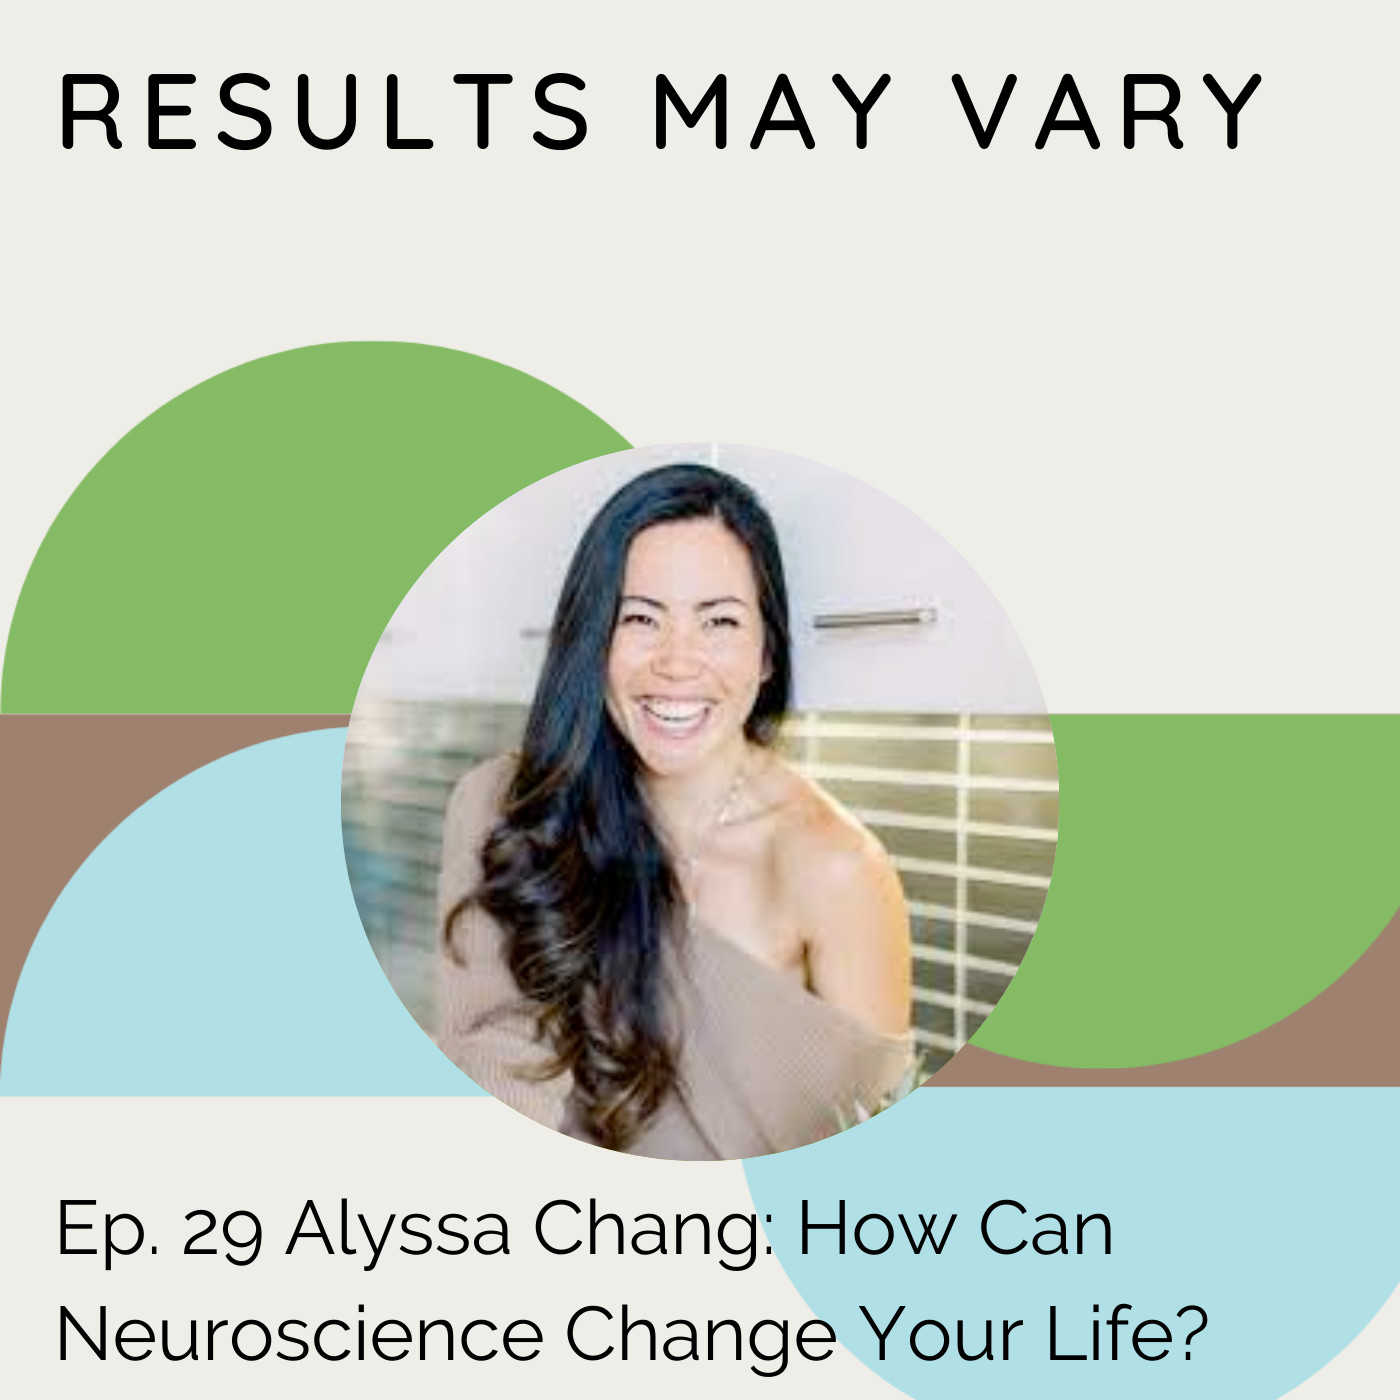 RMV 29 Alyssa Chang: How Can Neuroscience Change Your Life